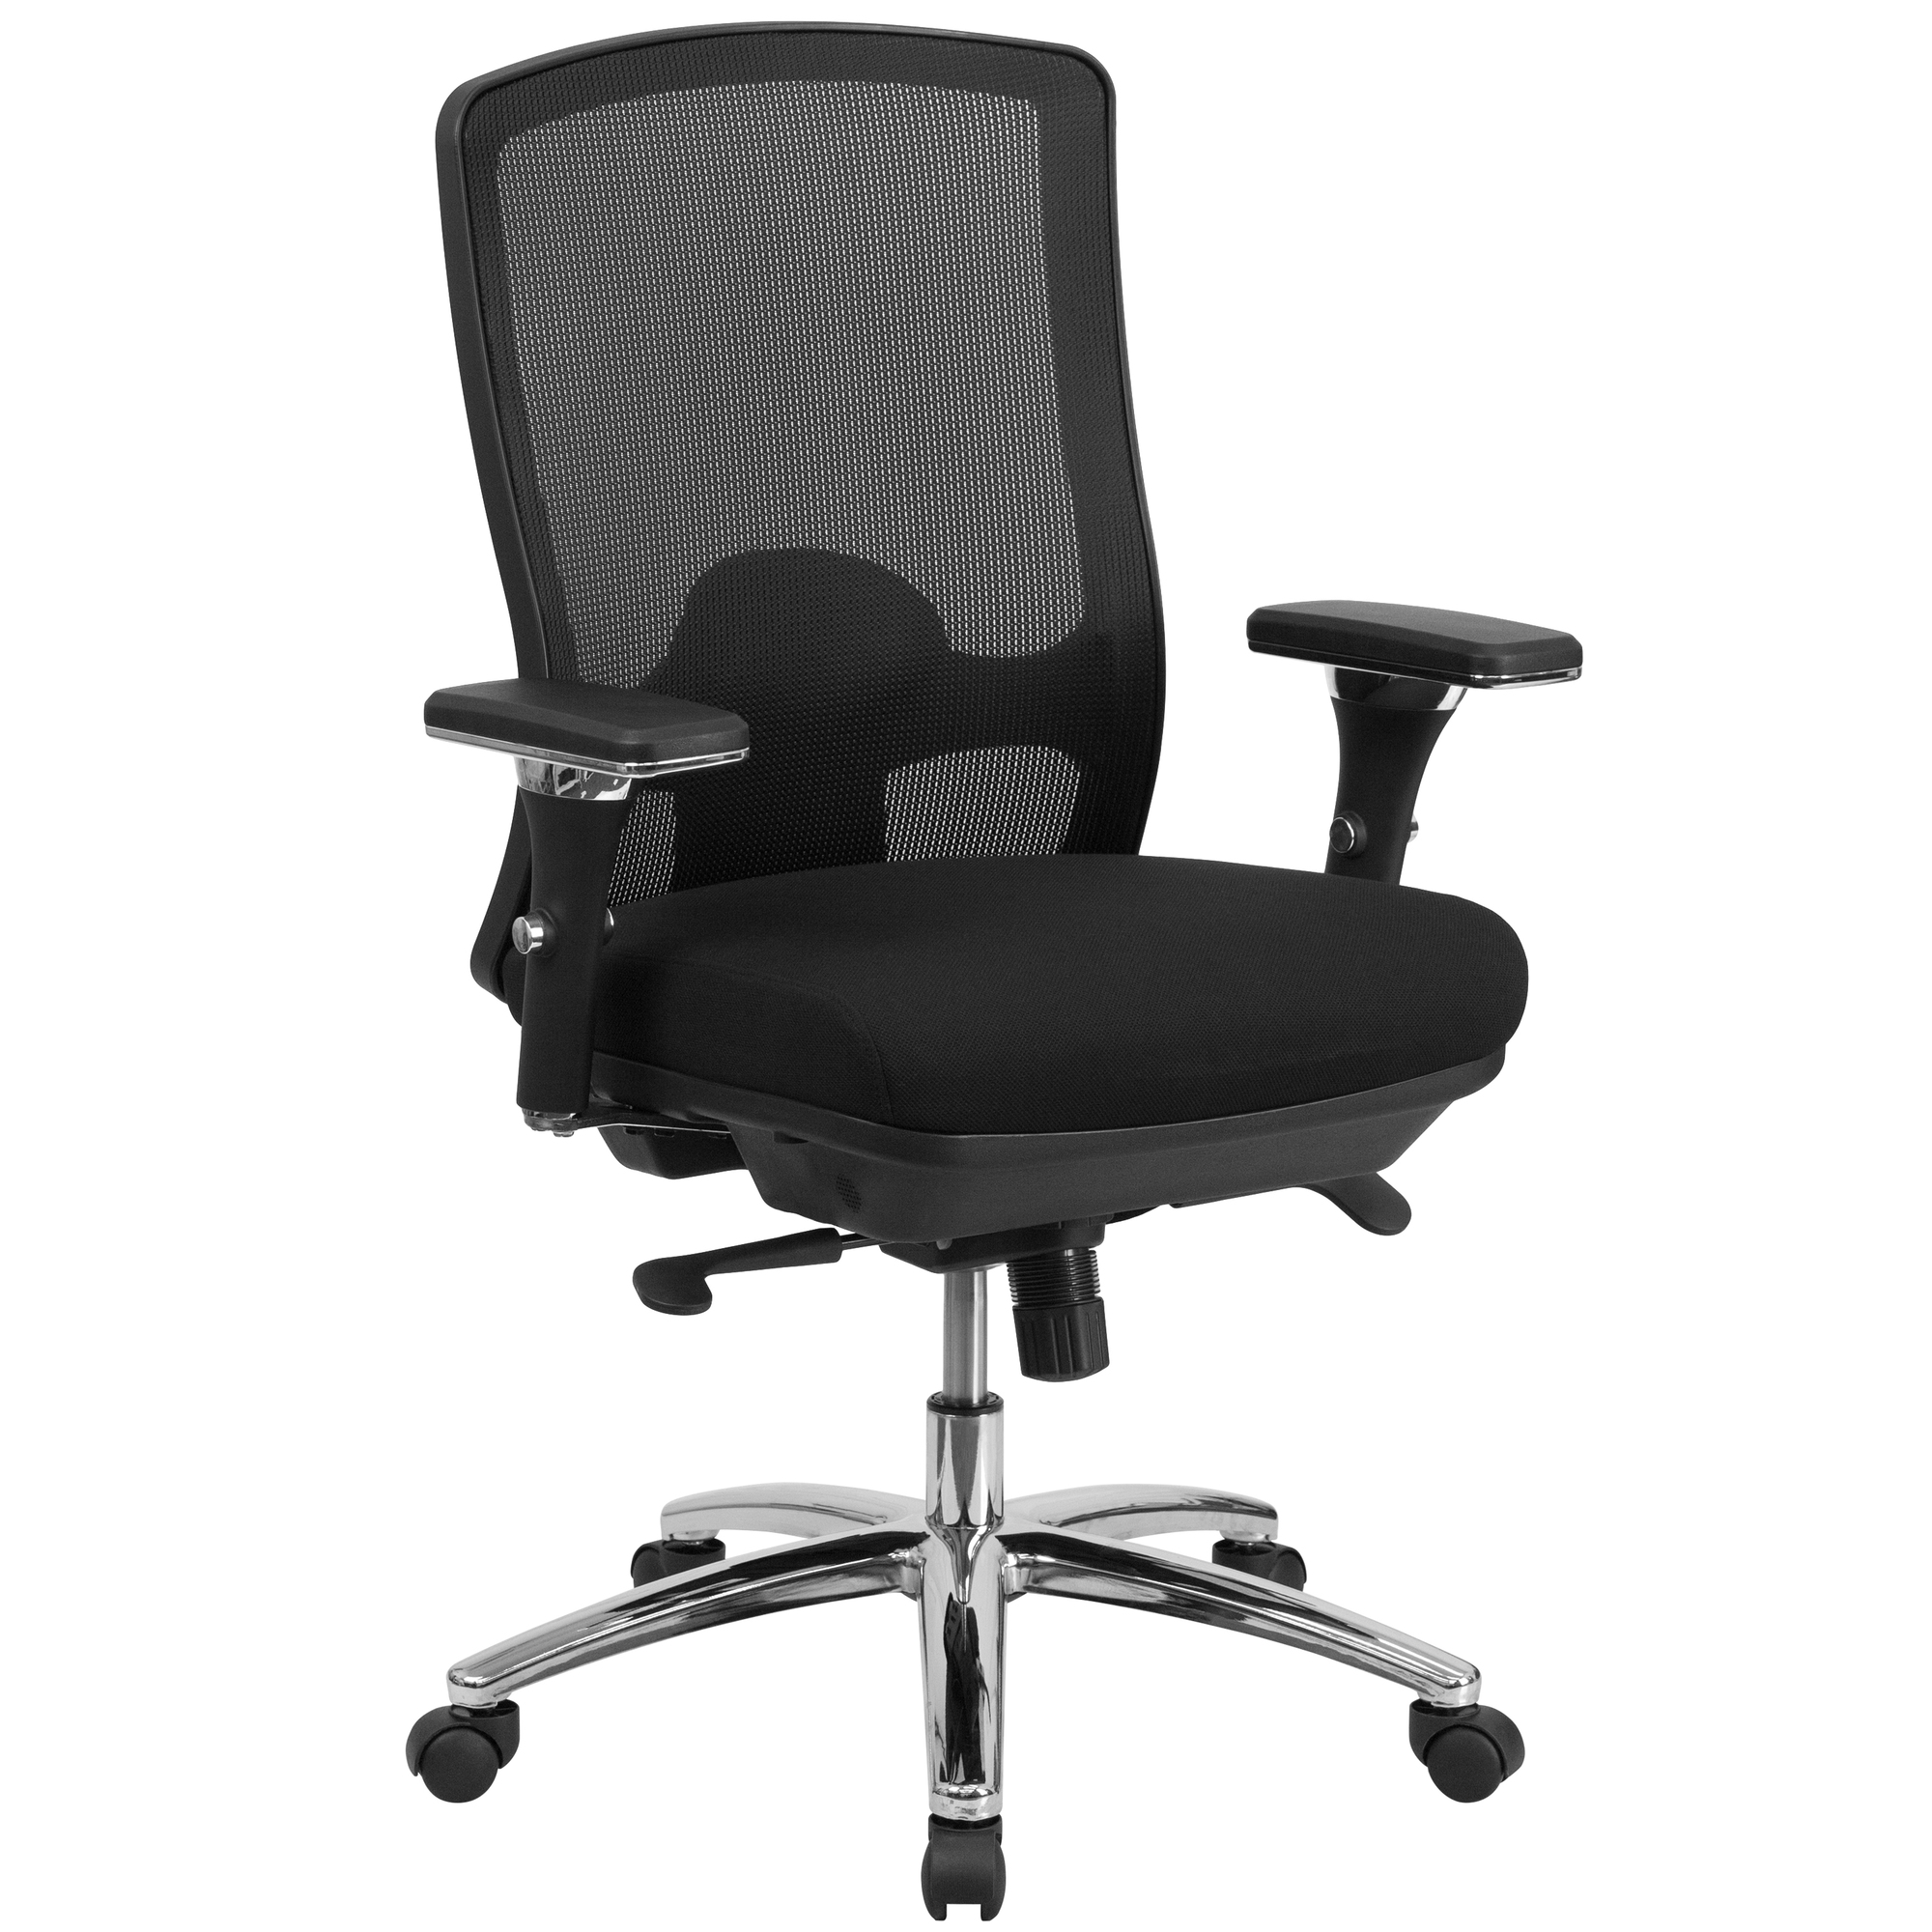 24/7 350 lb. Rated Black Mesh Multifunction Chair, Primary Color Black, Included (qty.) 1, Model - Flash Furniture LQ2BK